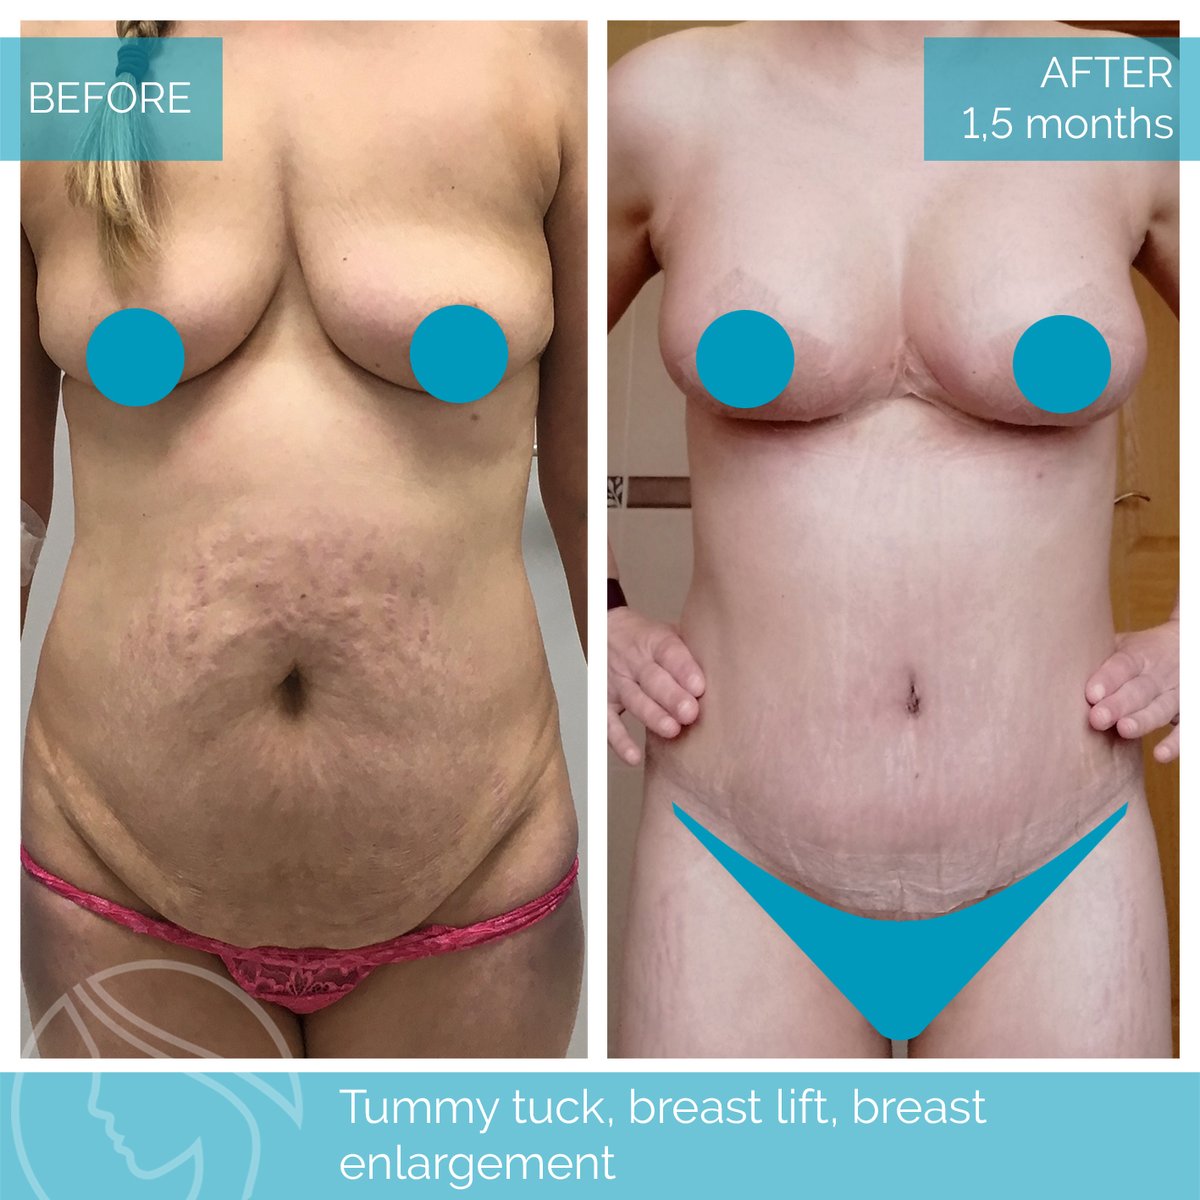 Nordesthetics Clinic on X: #Mommymakeover is a combination surgery that  usually consists of #abdominal and #breast correction. This surgery is one  of the most popular ones, as it is typically performed when